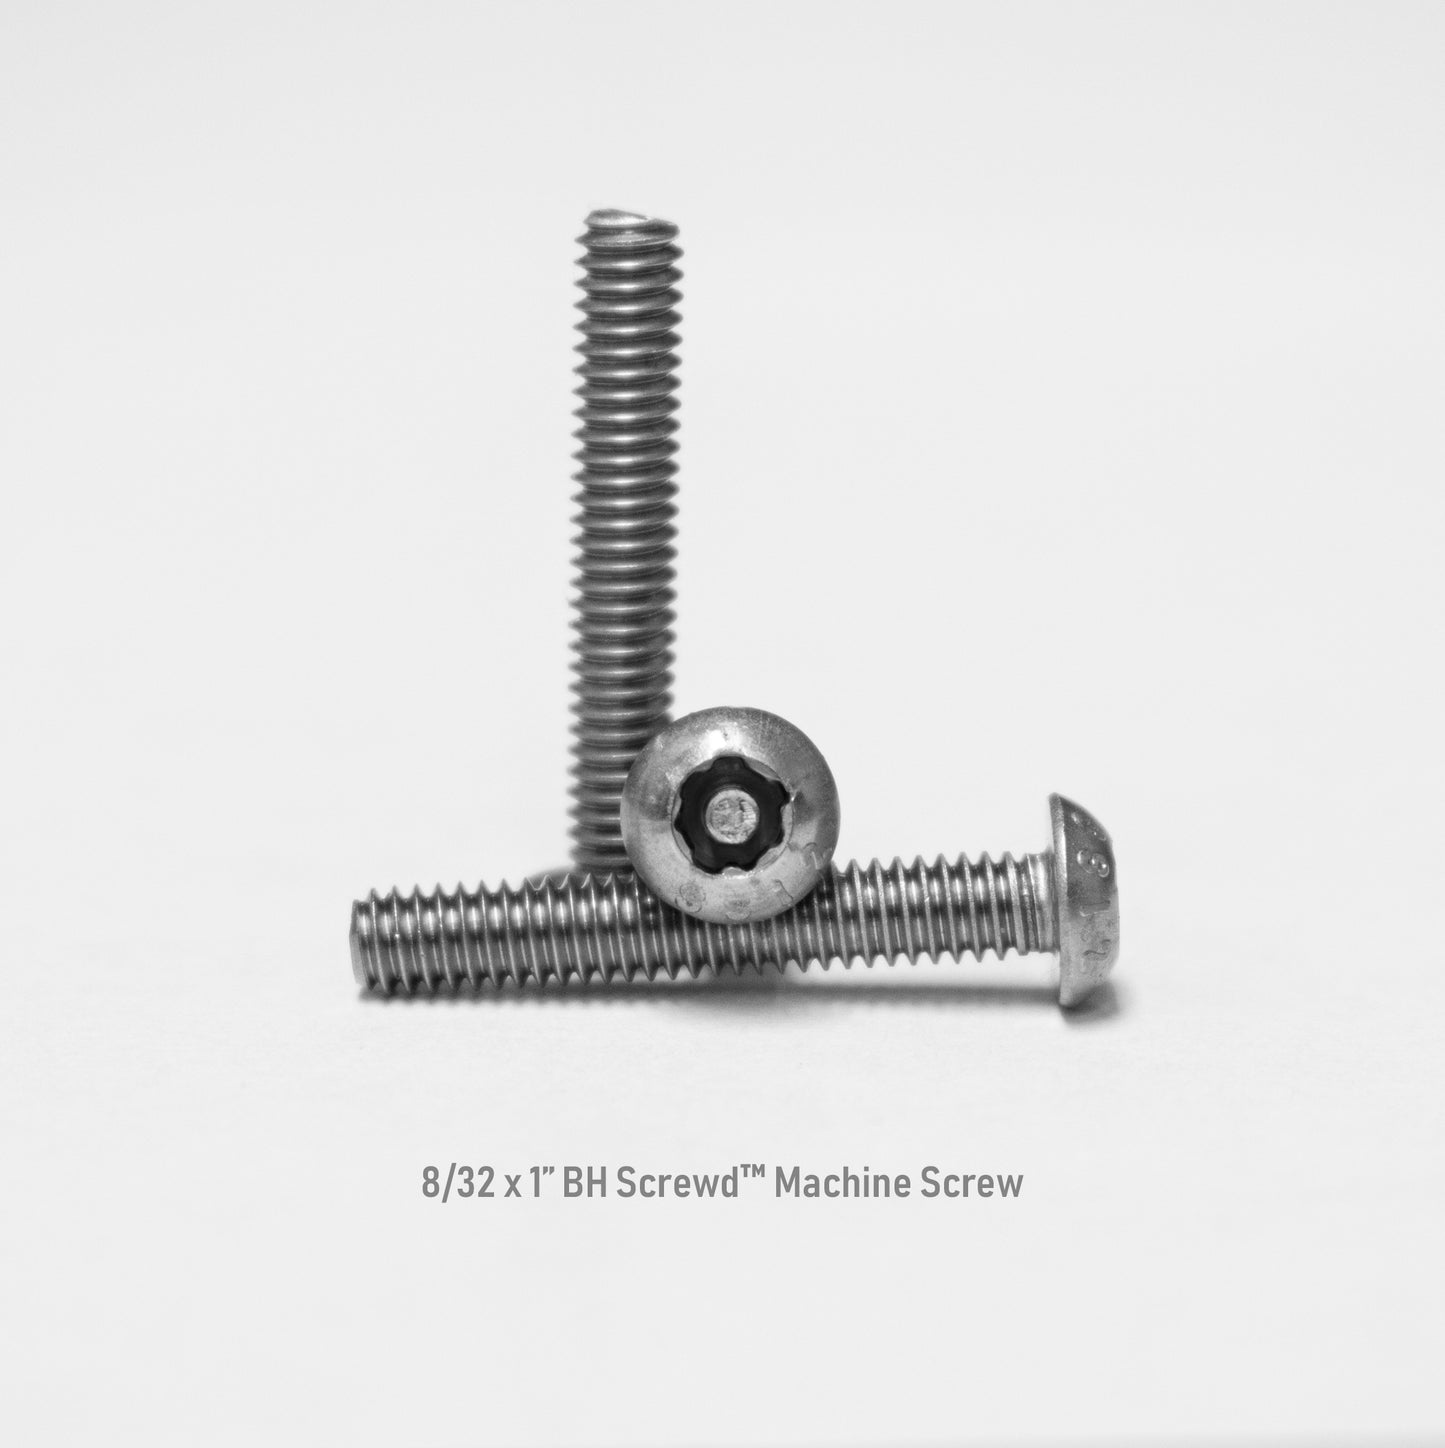 8-32 x 1" Button Head Screwd® Security Machine Screw Made out of Stainless Steel